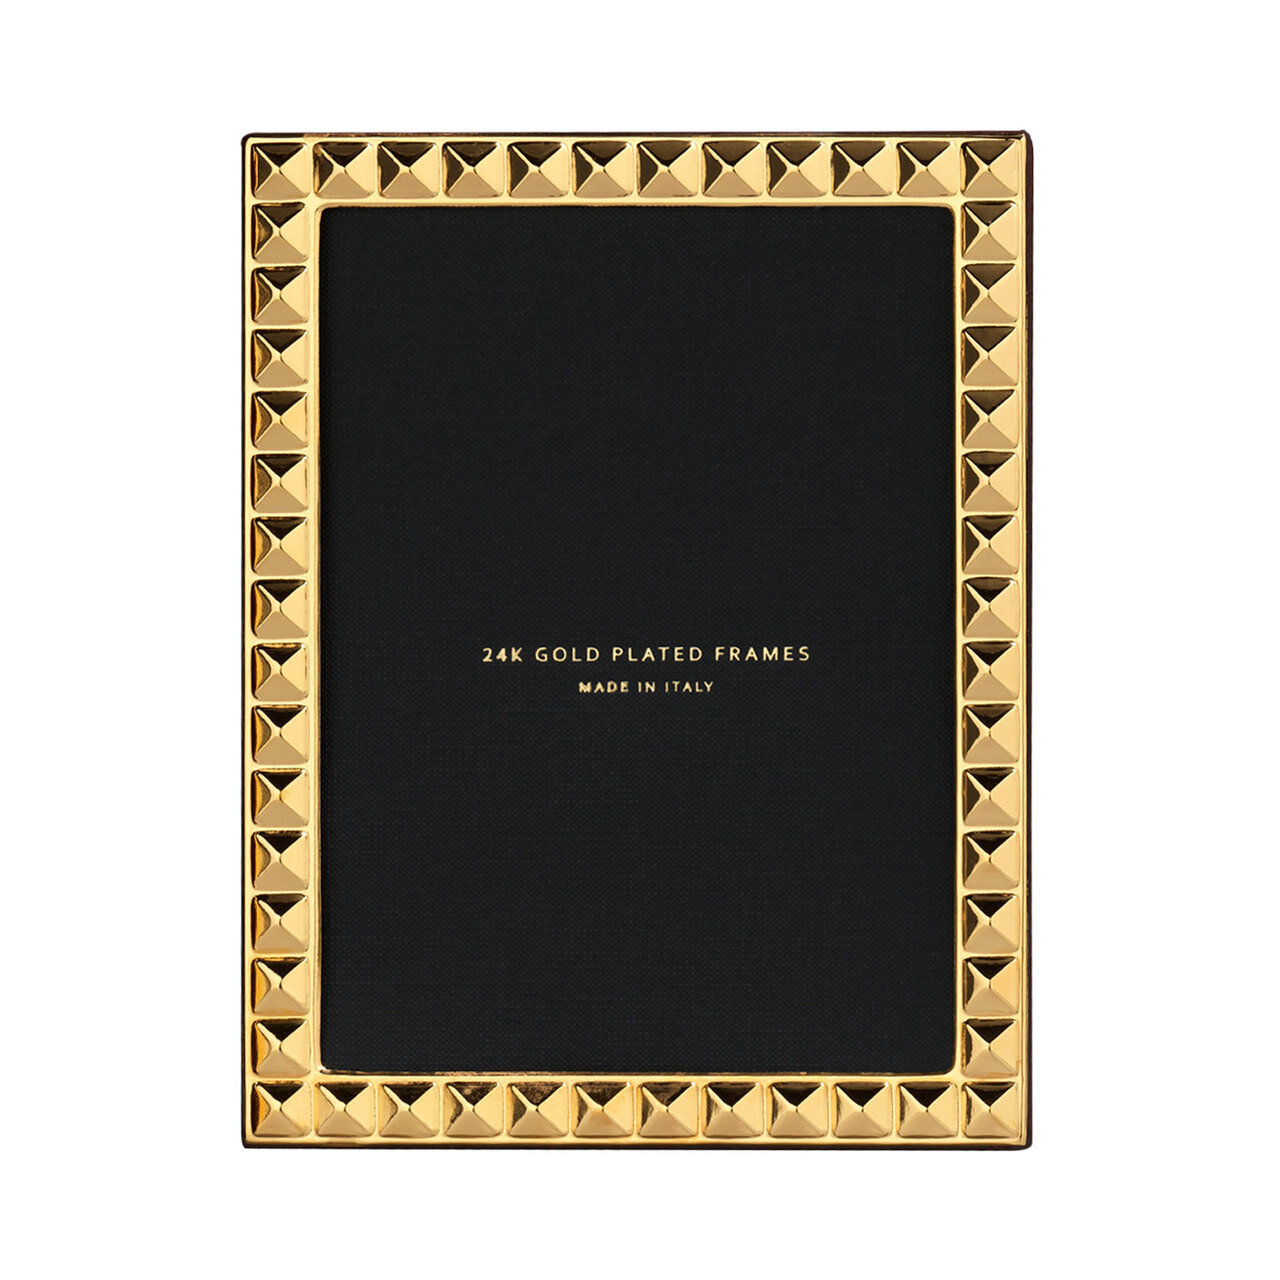 Cunill Diamonds 8 x 10 Inch Picture Frame - 24k Gold Plated 0.5 Microns